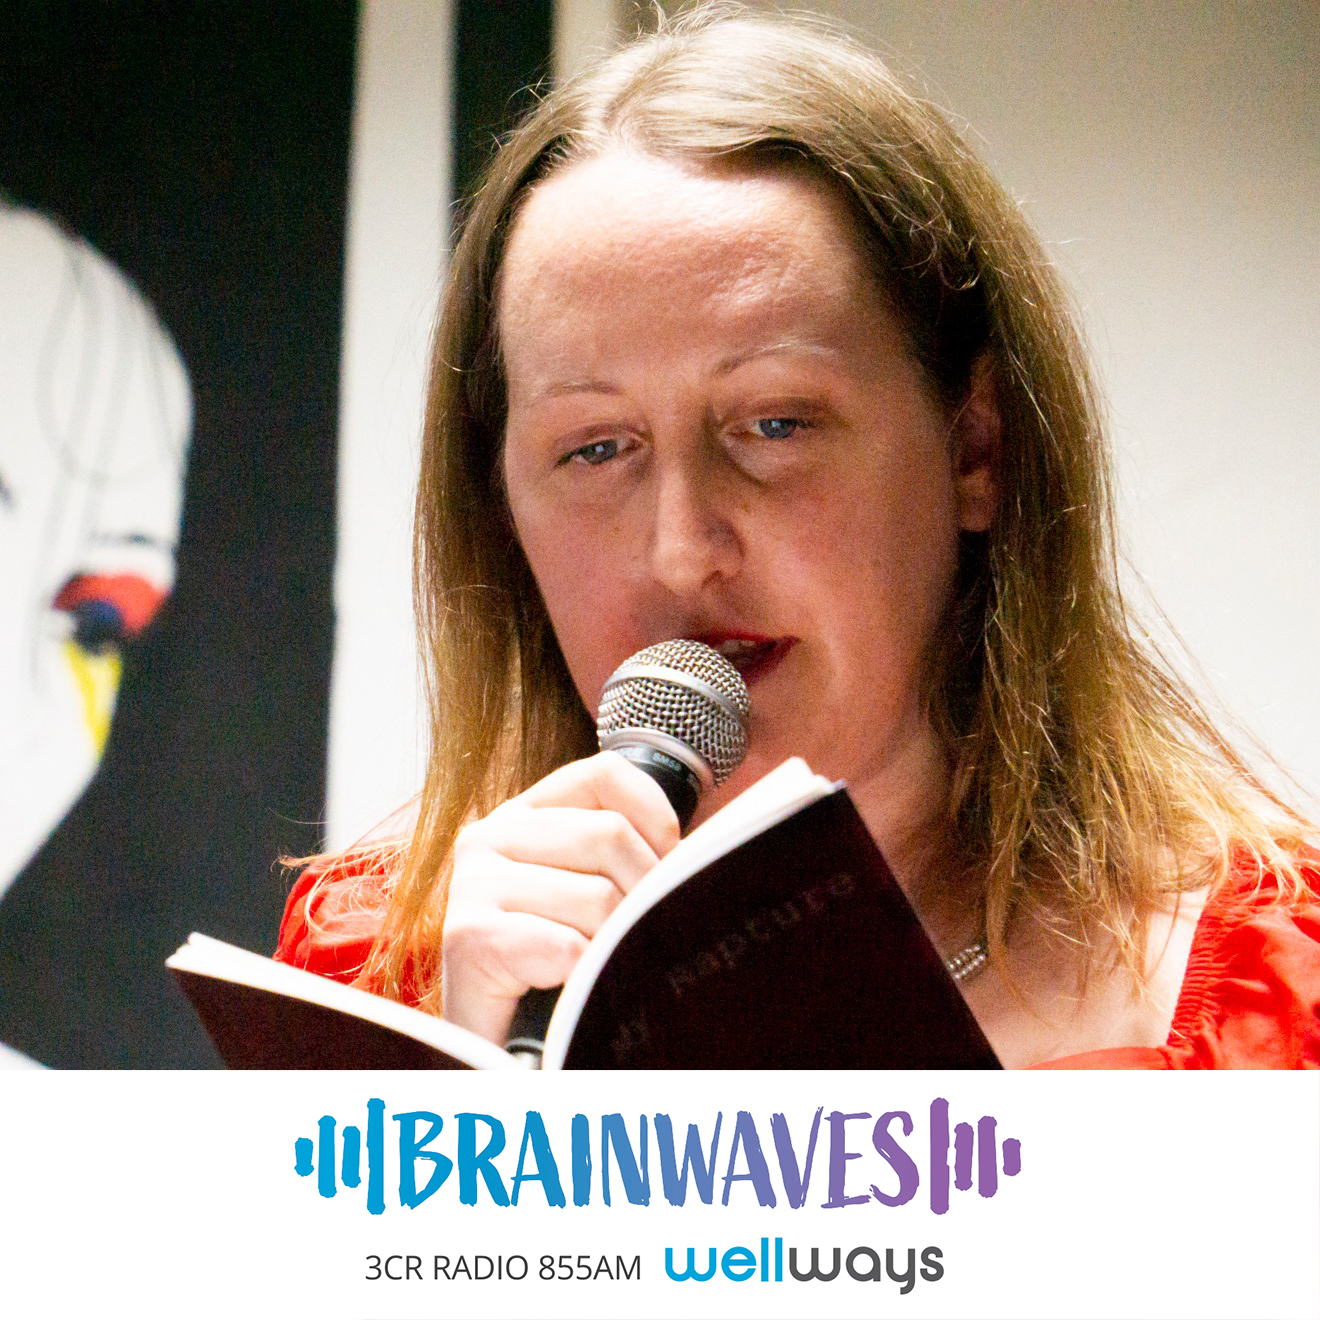 Gemma White is photographed reading her poetry at a live event. She is a caucasian woman with blonde hair wearing a red top, holding a microphone to her mouth as she reads from a book with a black cover. There is a large piece of wall art behind her.